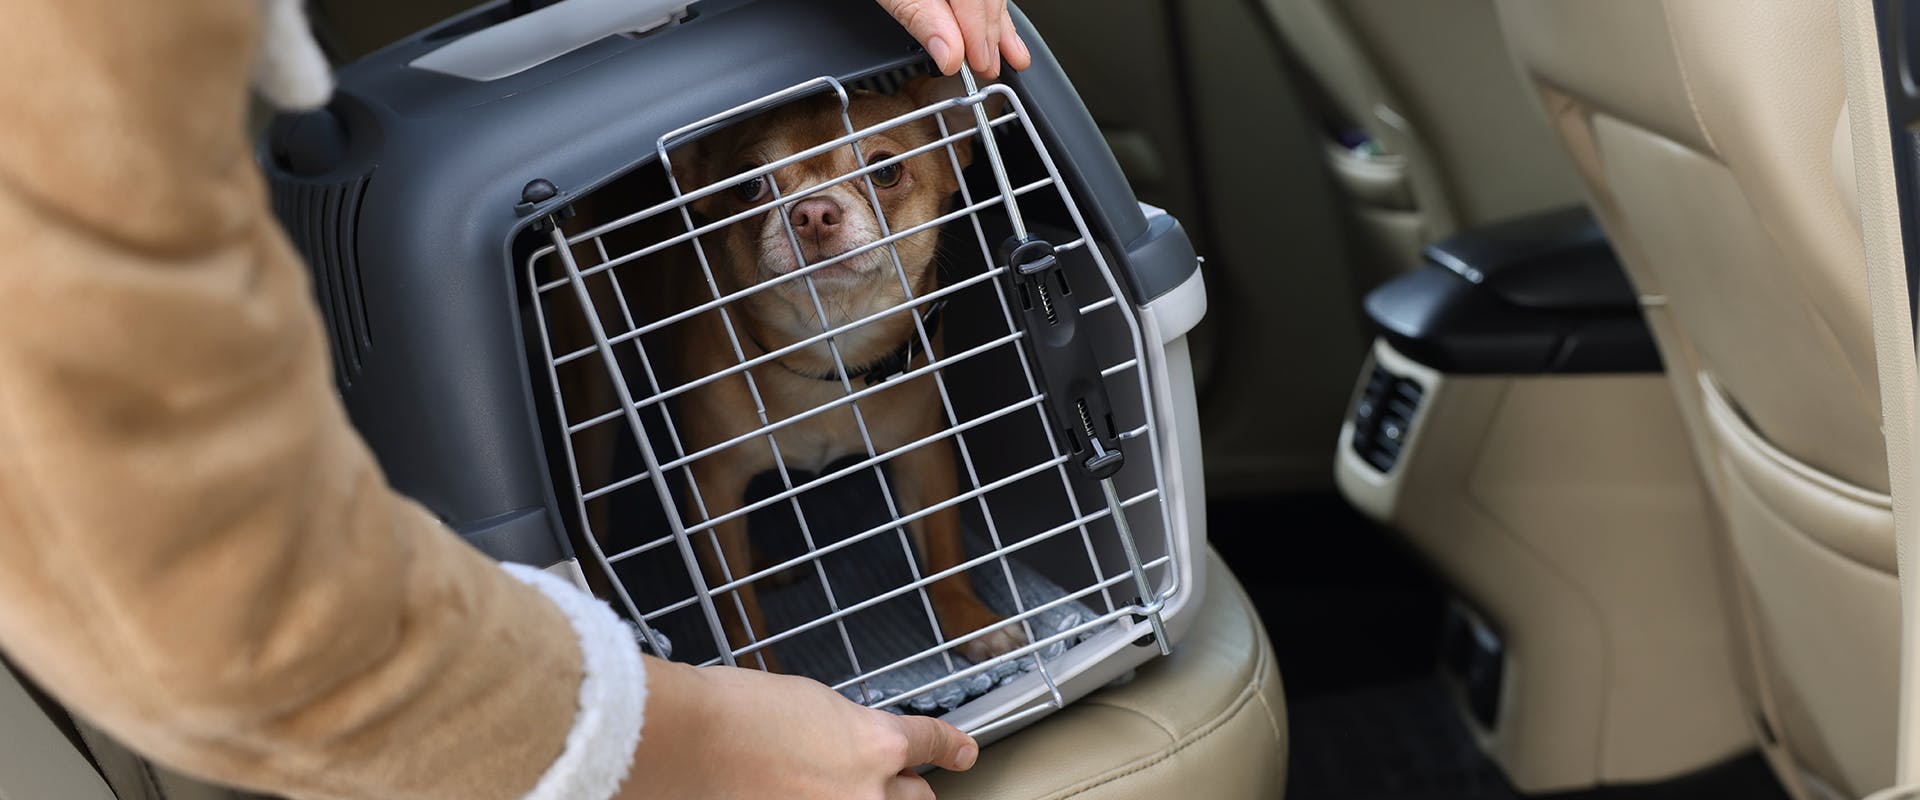 A person restraining a dog in a travel crate in the back seat of a car